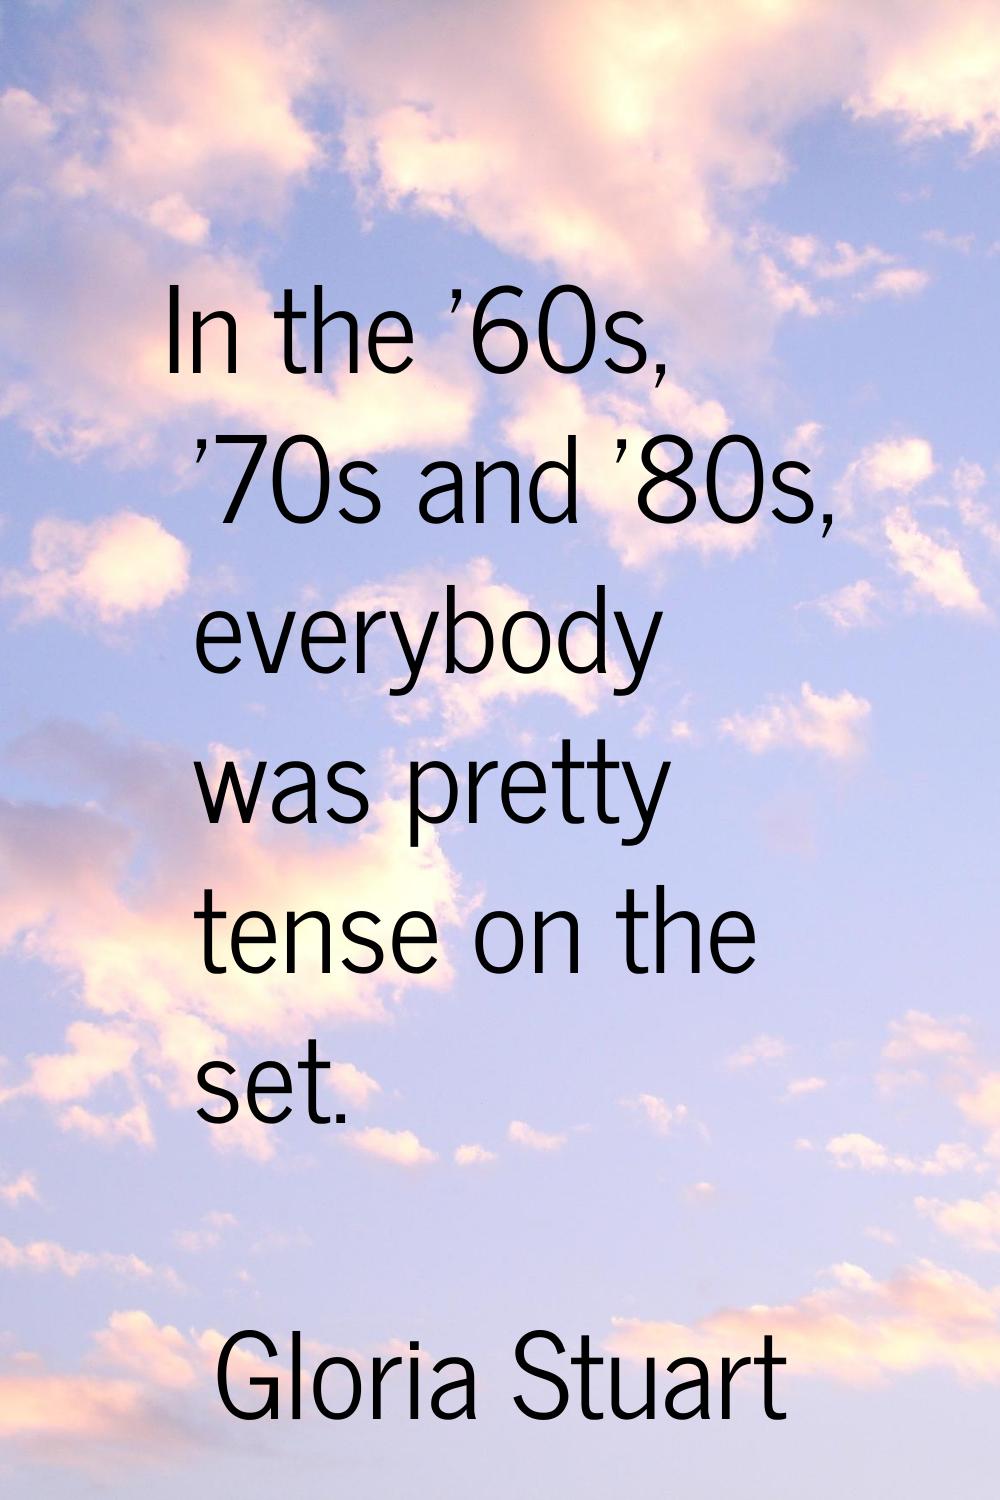 In the '60s, '70s and '80s, everybody was pretty tense on the set.